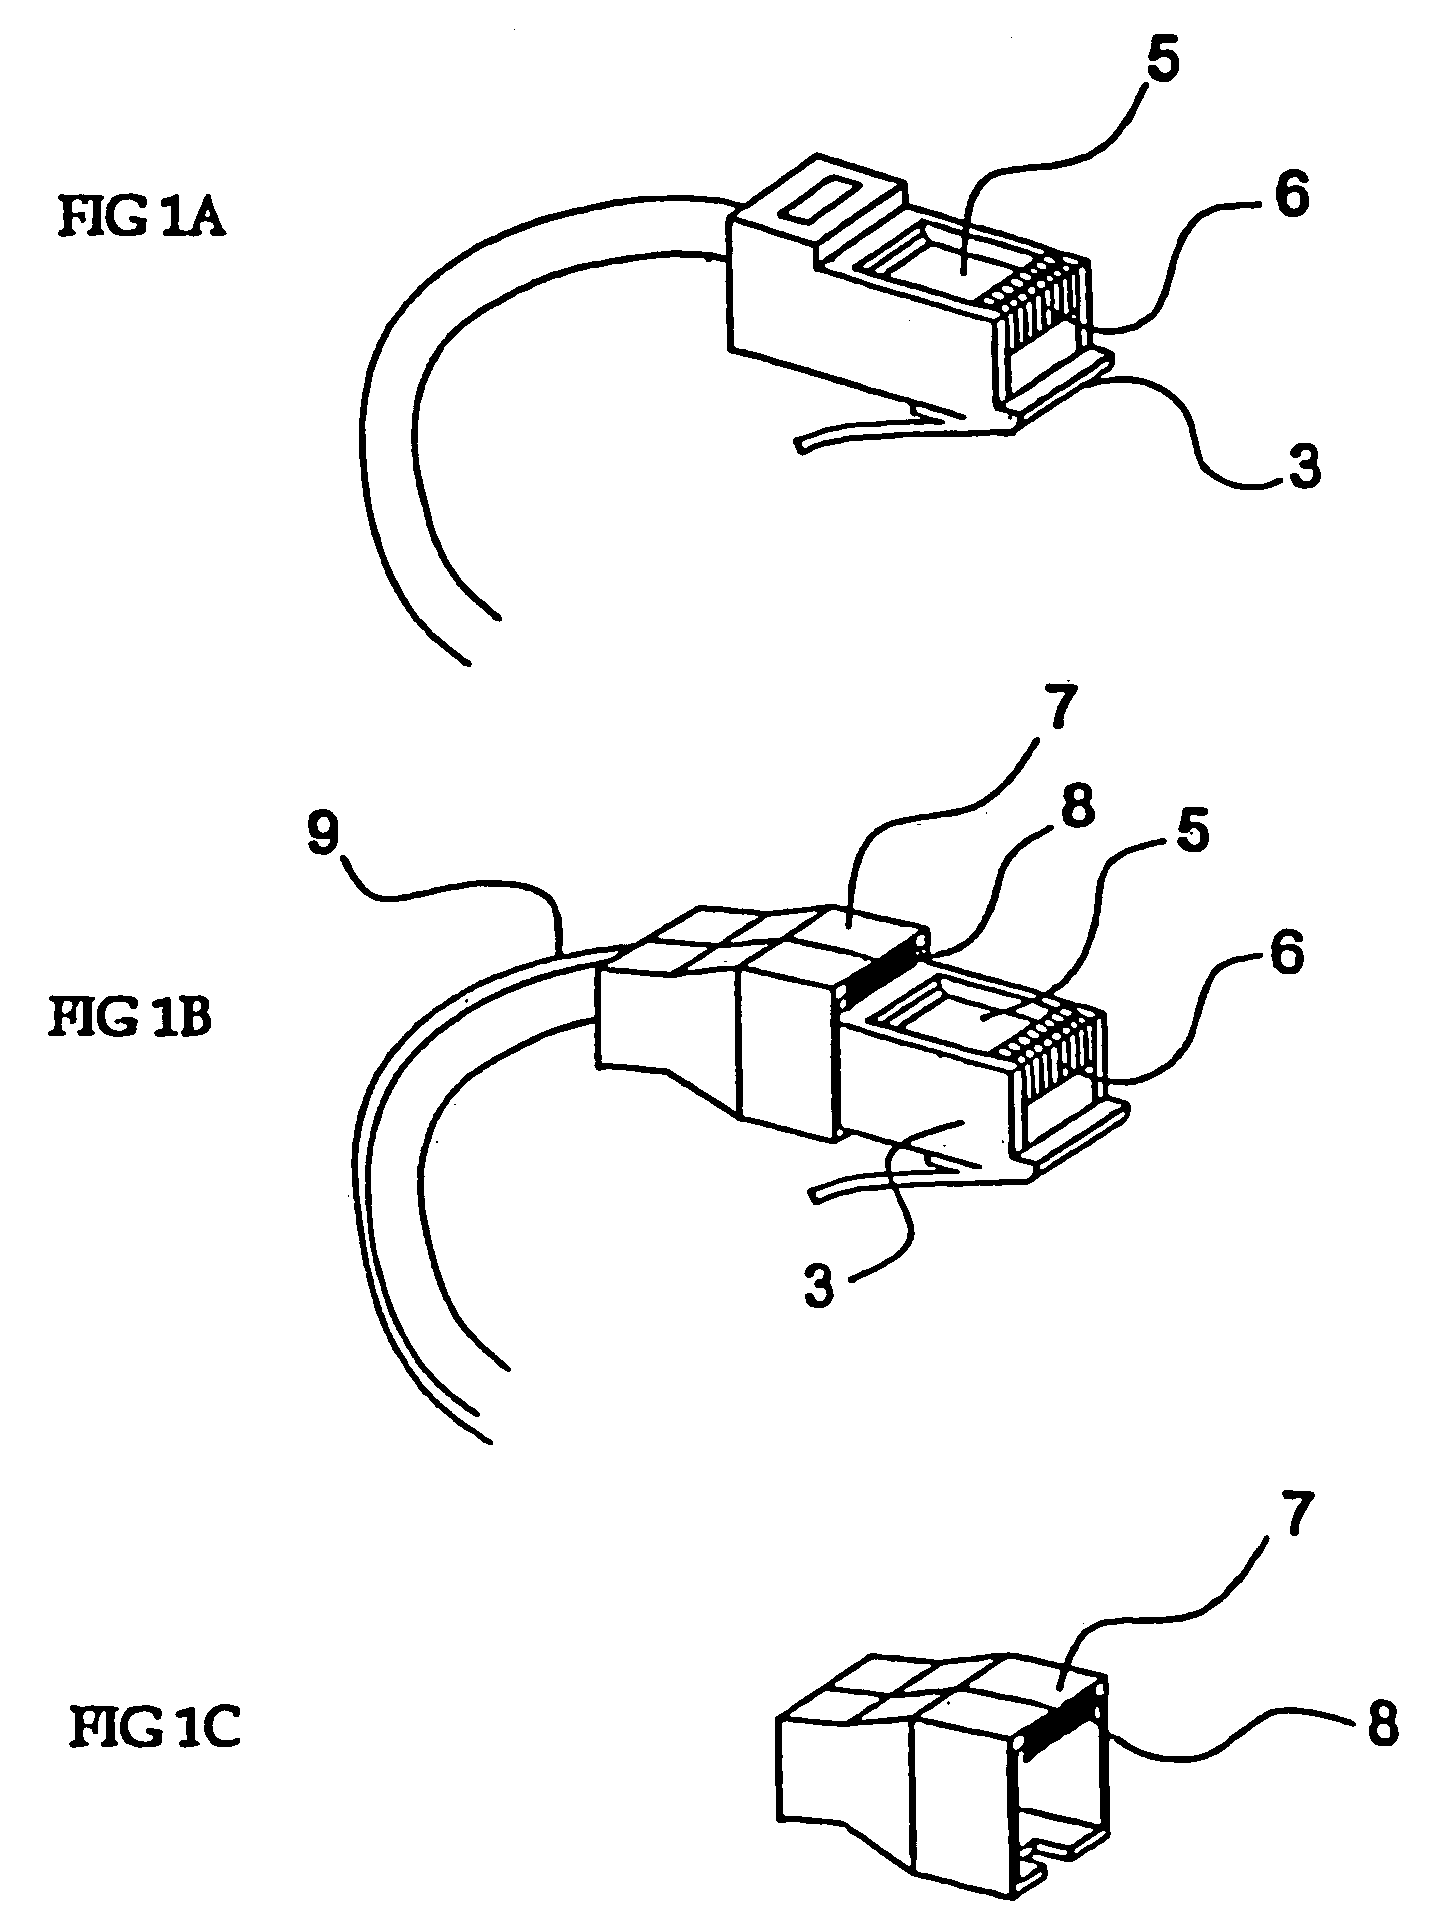 System for monitoring connection pattern of data ports